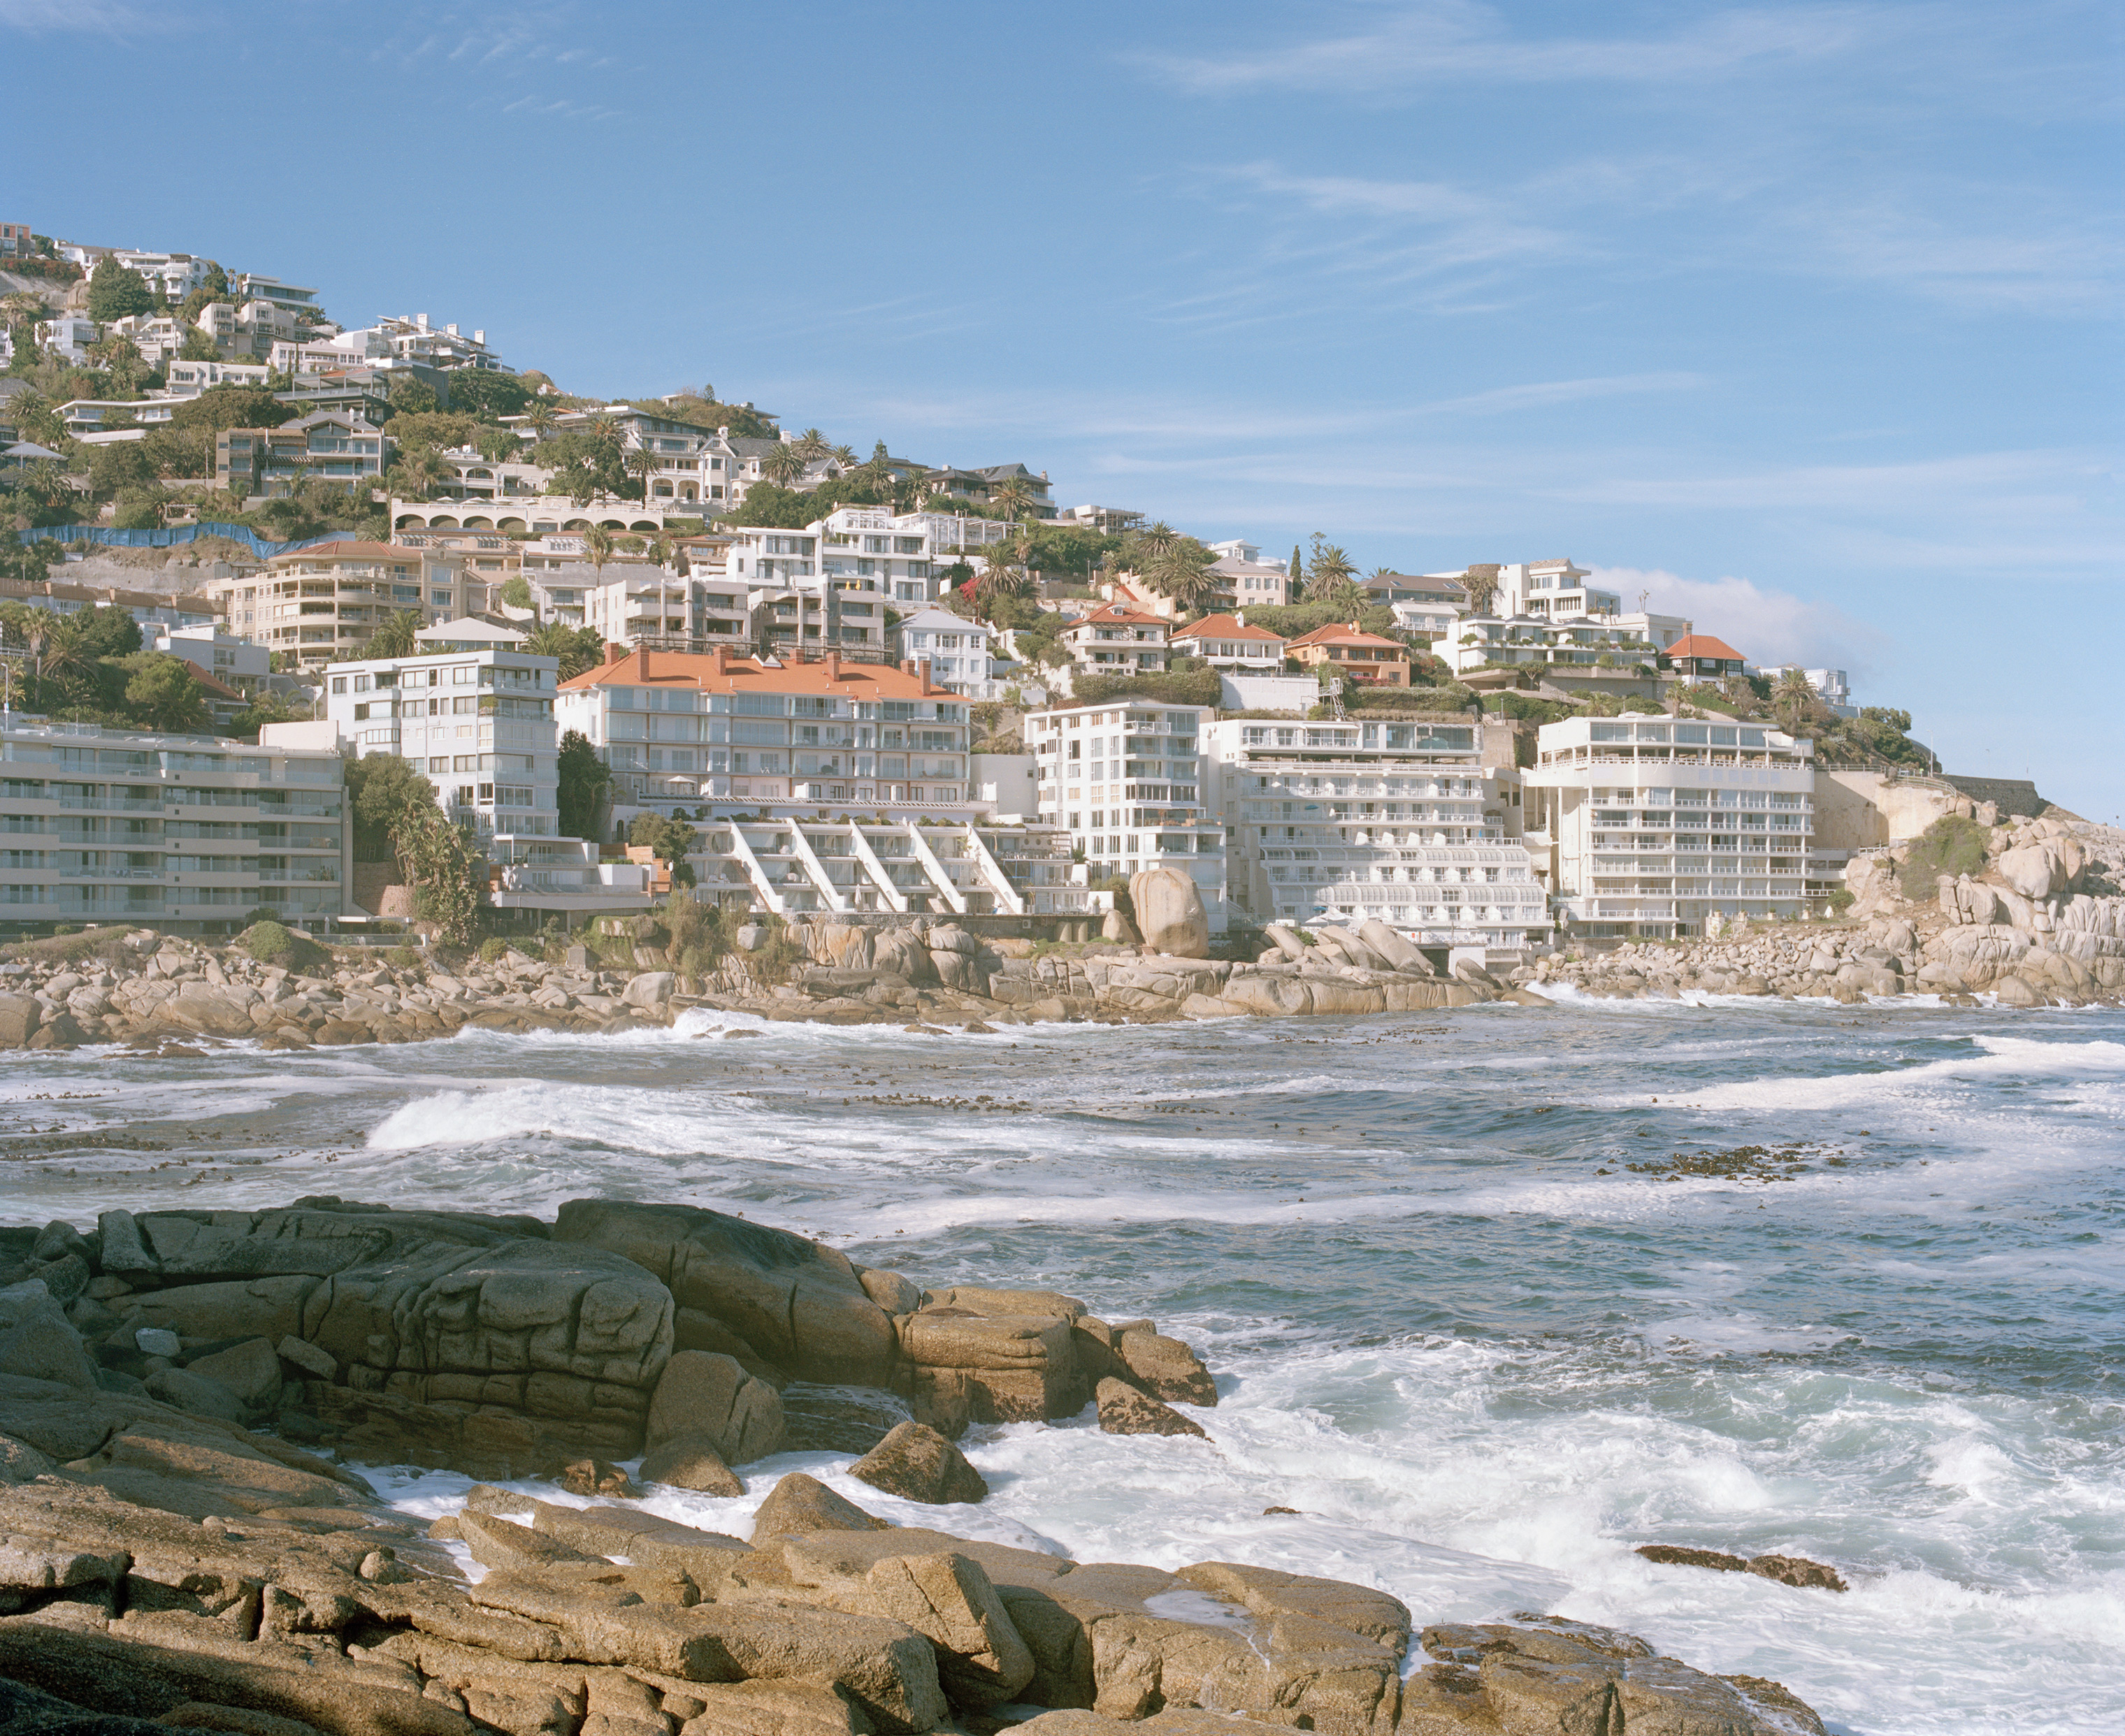 A view of Bantry Bay. The World Bank last year deemed South Africa the world’s most unequal society. (Sarah Nankin for TIME)